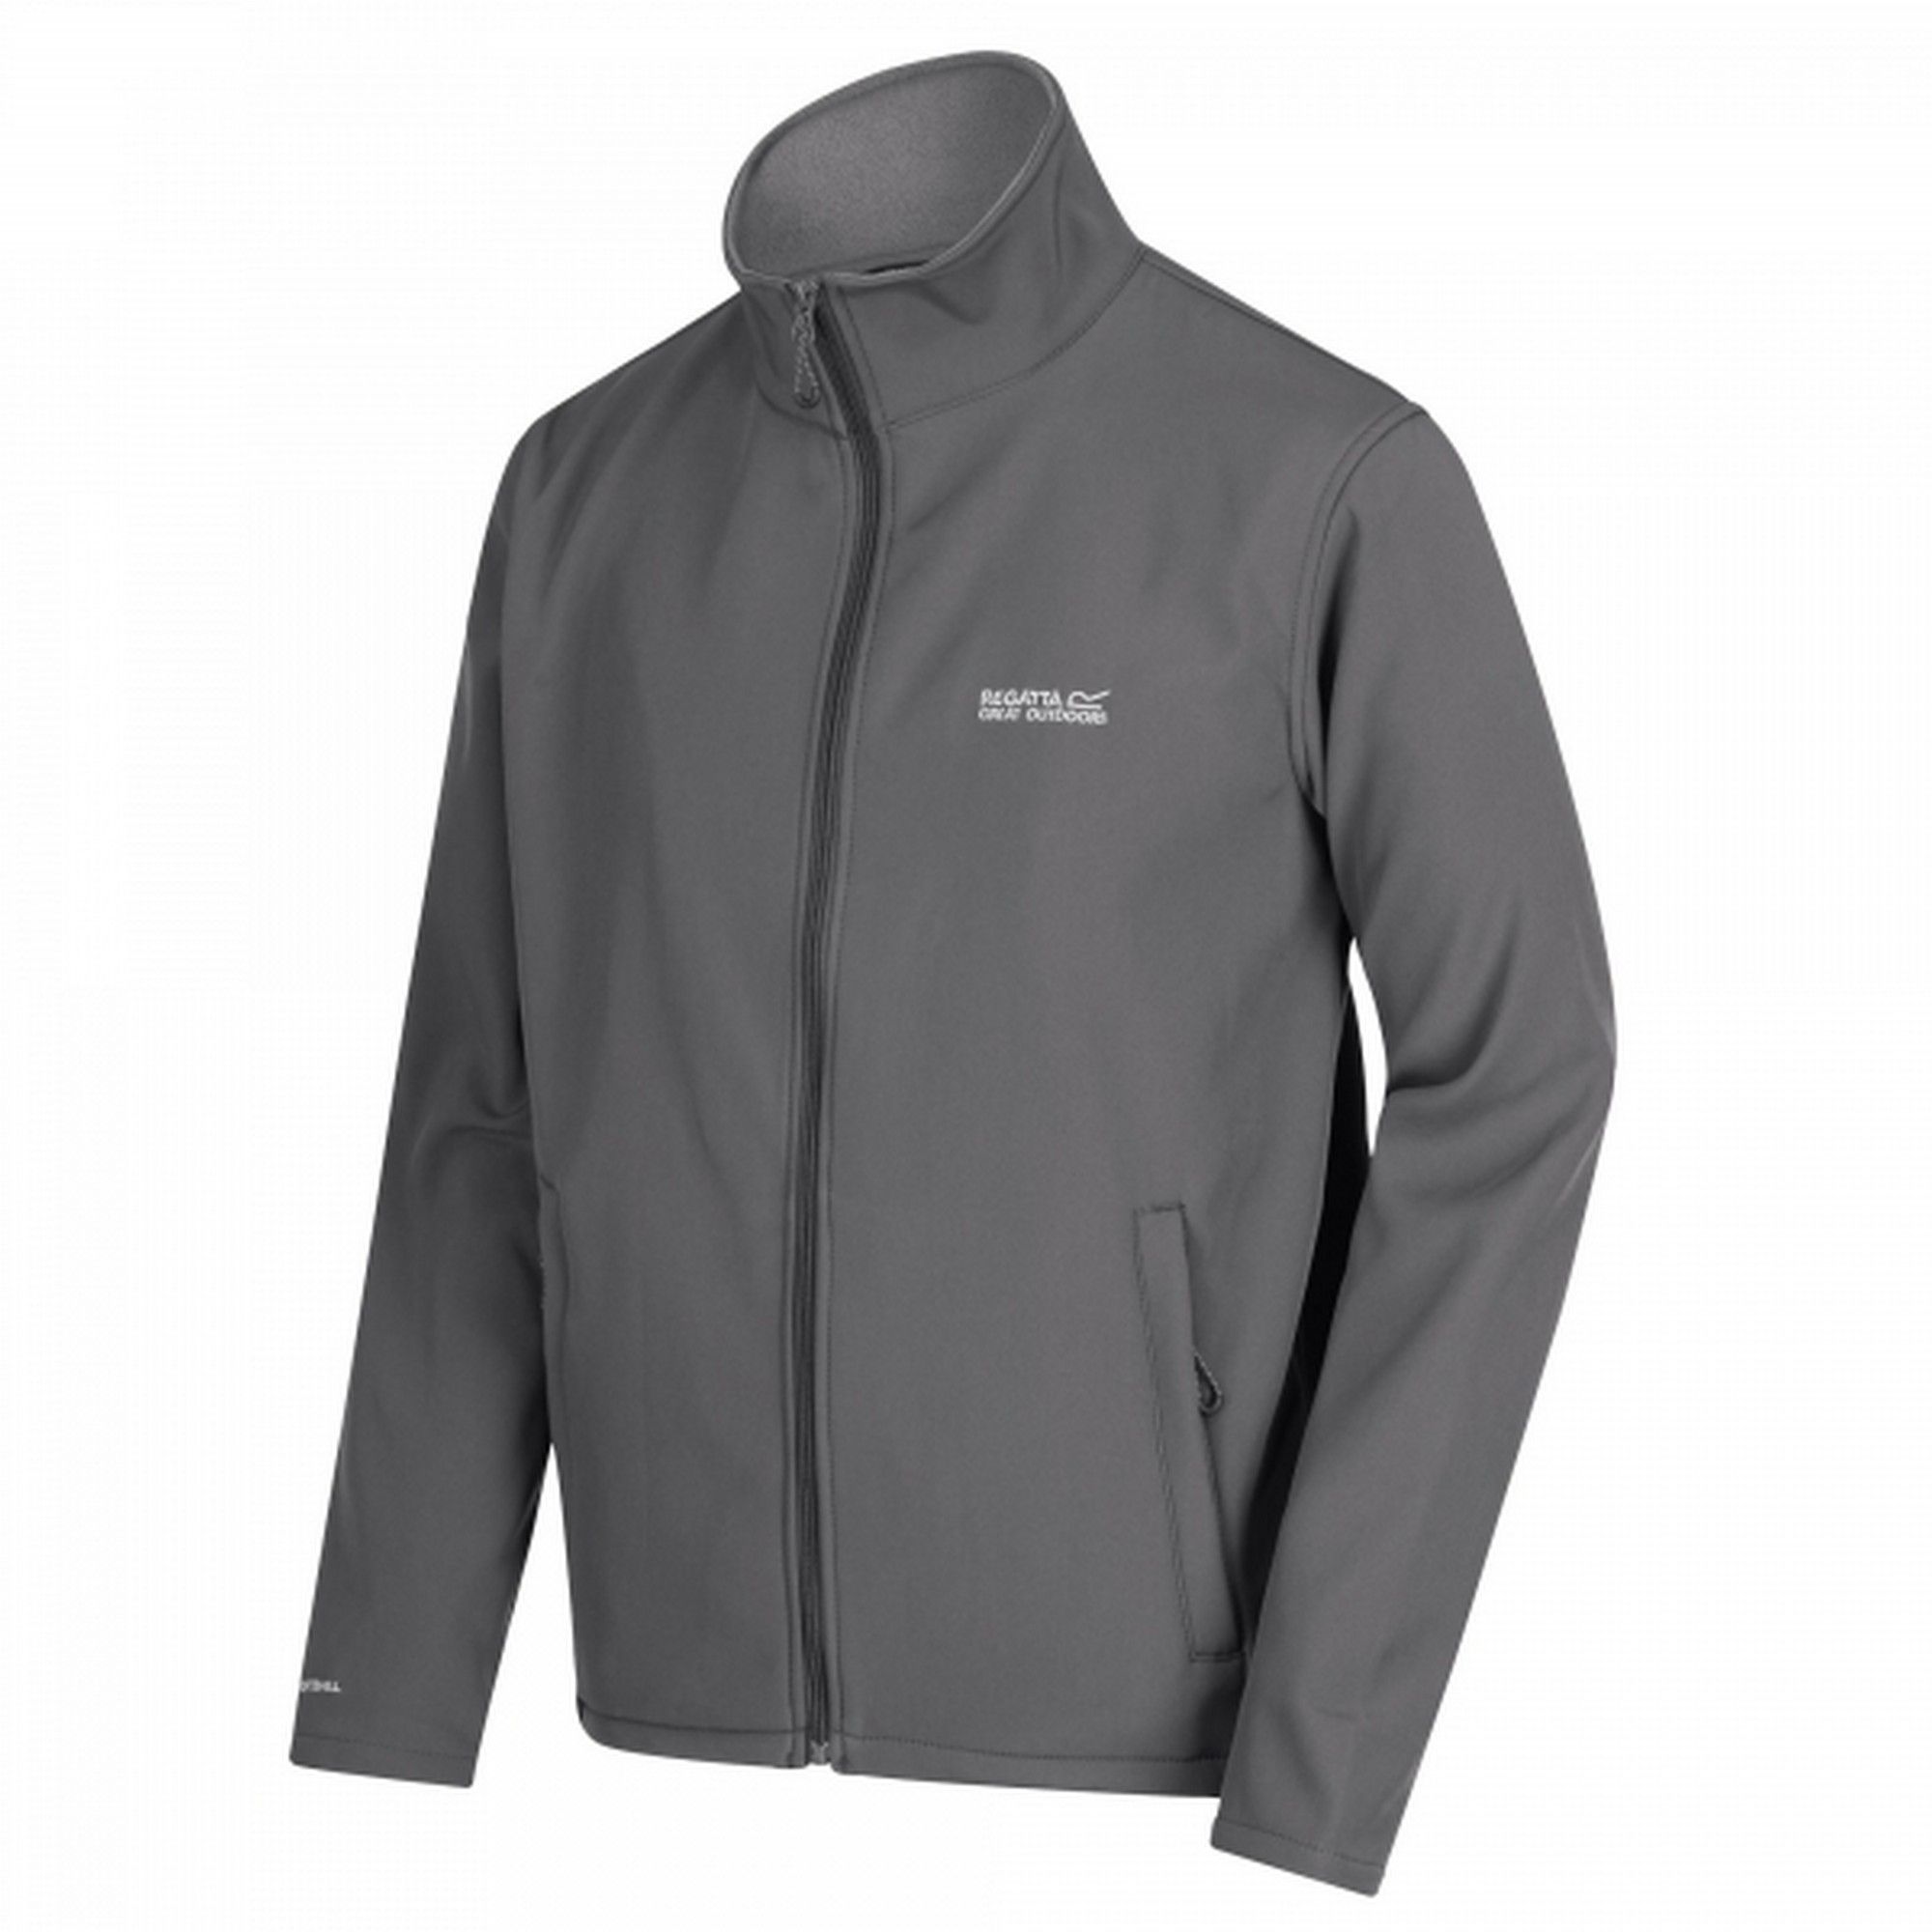 The mens Cera II is a best-selling Softshell jackets. Offering great value and quality across four seasons, you can wear it as a light jacket on mild weather days or as an insulating mid-layer during colder months. The stretchy fabric has a DWR (Durable Water Repellent) finish to guard against wind and showers, and a soft, warm backing for added comfort. Complete with two zipped pockets to keep car keys/mid-walk sweets/dog treats/phones safe. 100% Polyester. Regatta Mens sizing (chest approx): XS (35-36in/89-91.5cm), S (37-38in/94-96.5cm), M (39-40in/99-101.5cm), L (41-42in/104-106.5cm), XL (43-44in/109-112cm), XXL (46-48in/117-122cm), XXXL (49-51in/124.5-129.5cm), XXXXL (52-54in/132-137cm), XXXXXL (55-57in/140-145cm).